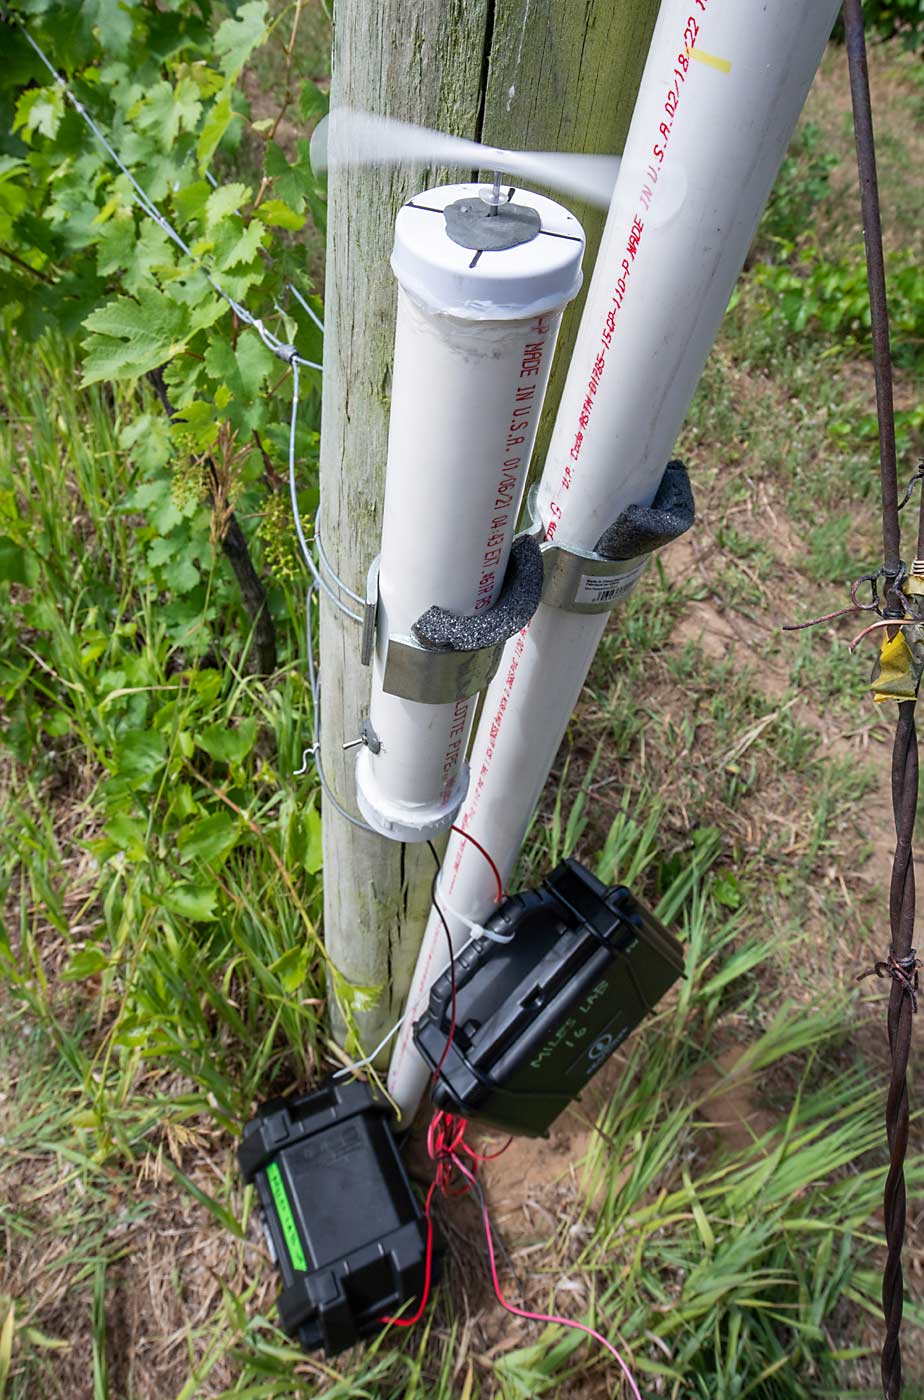 Each spore trap has spinning rods at the top. The grease-covered rods collect pathogen spores floating in the air. Different speeds are used to collect different-sized spores. (TJ Mullinax/Good Fruit Grower)